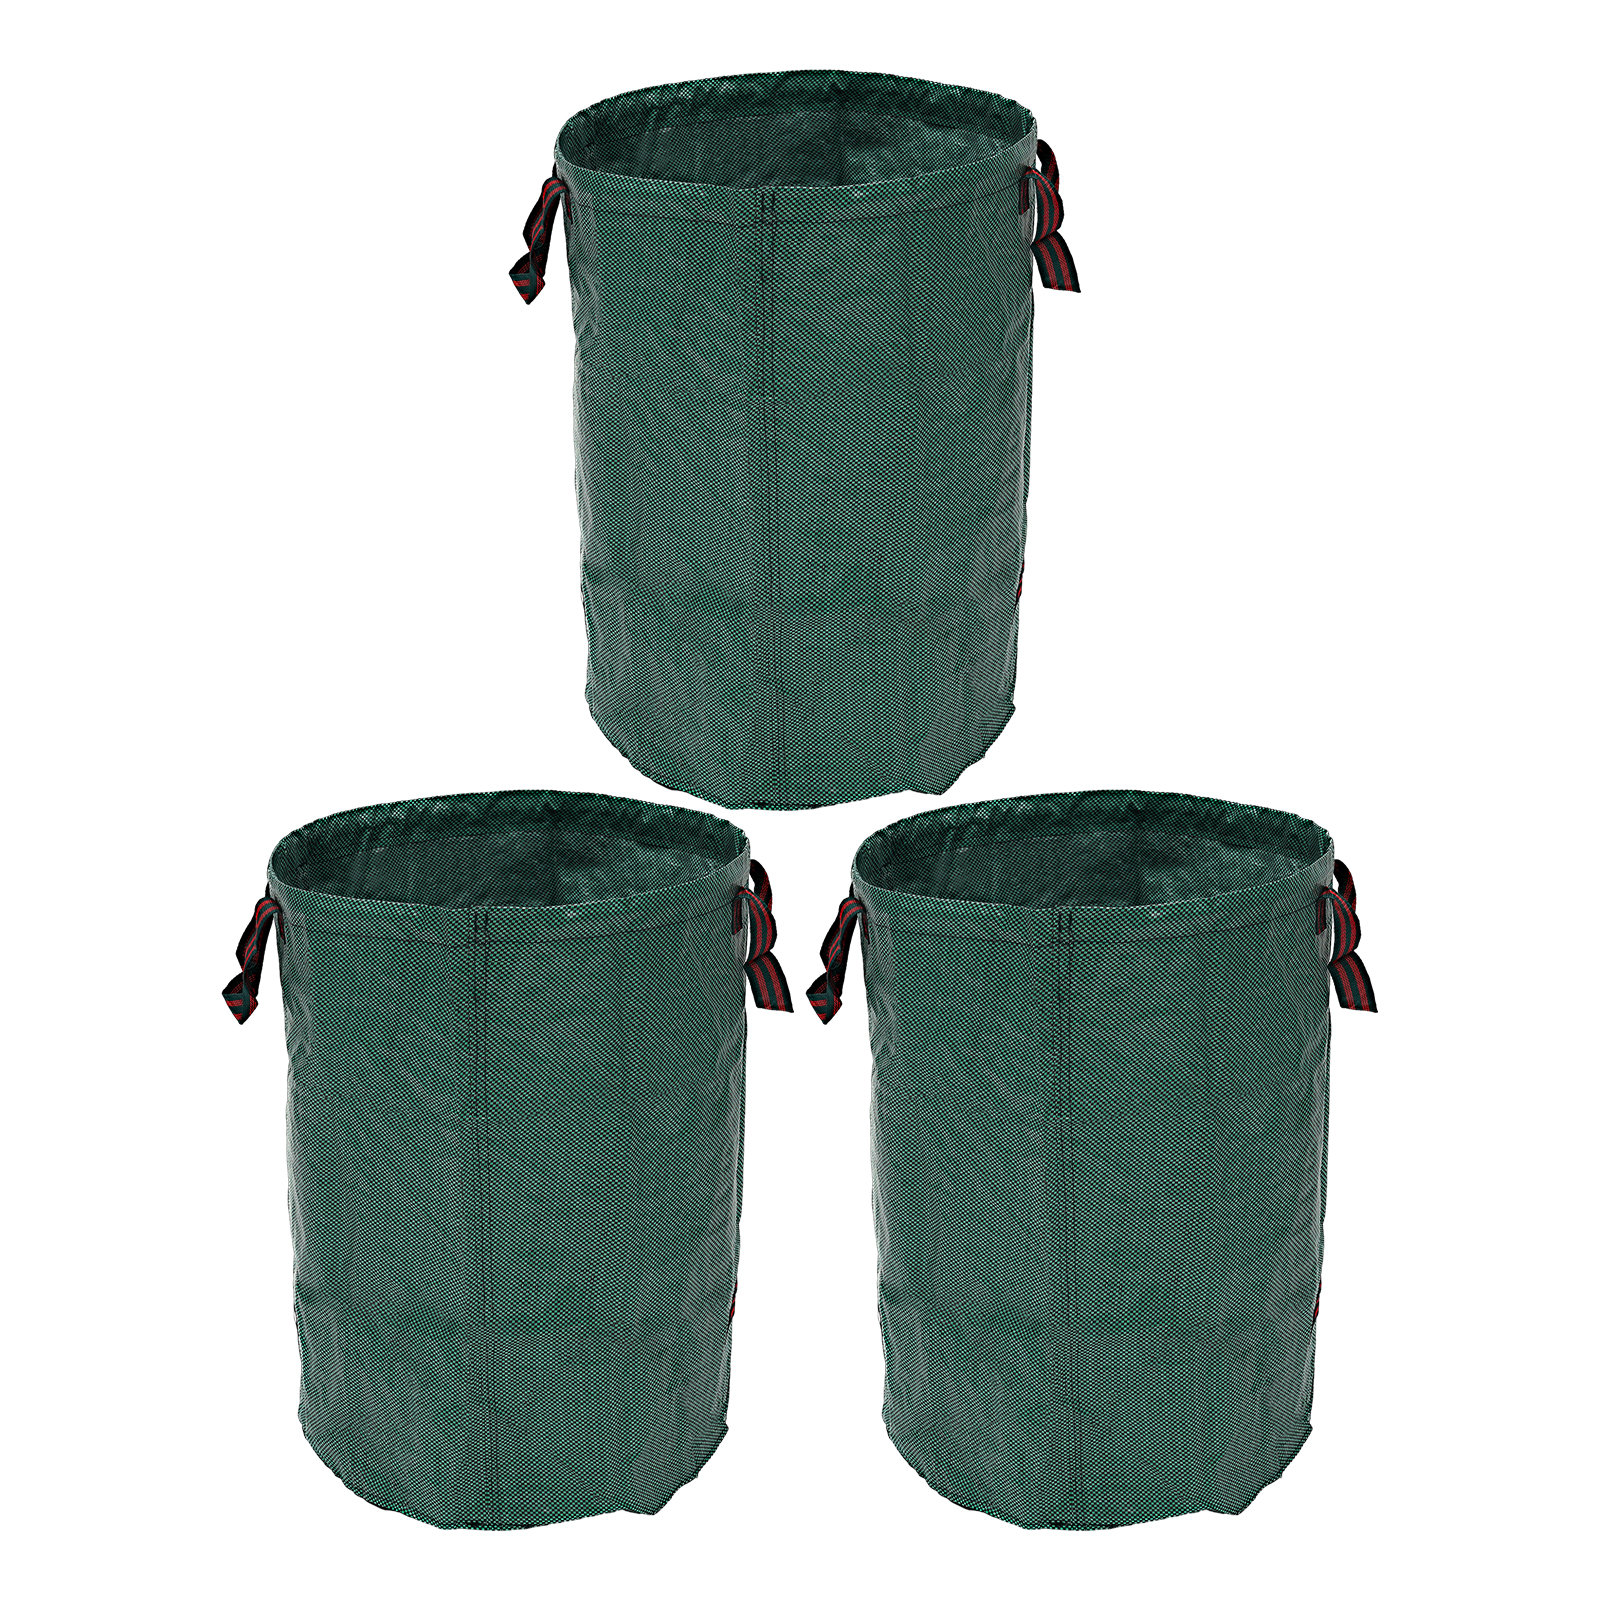 Outdoor Yard Waste Bags Reusable Collapsible Garden Leaf Bag Lawn